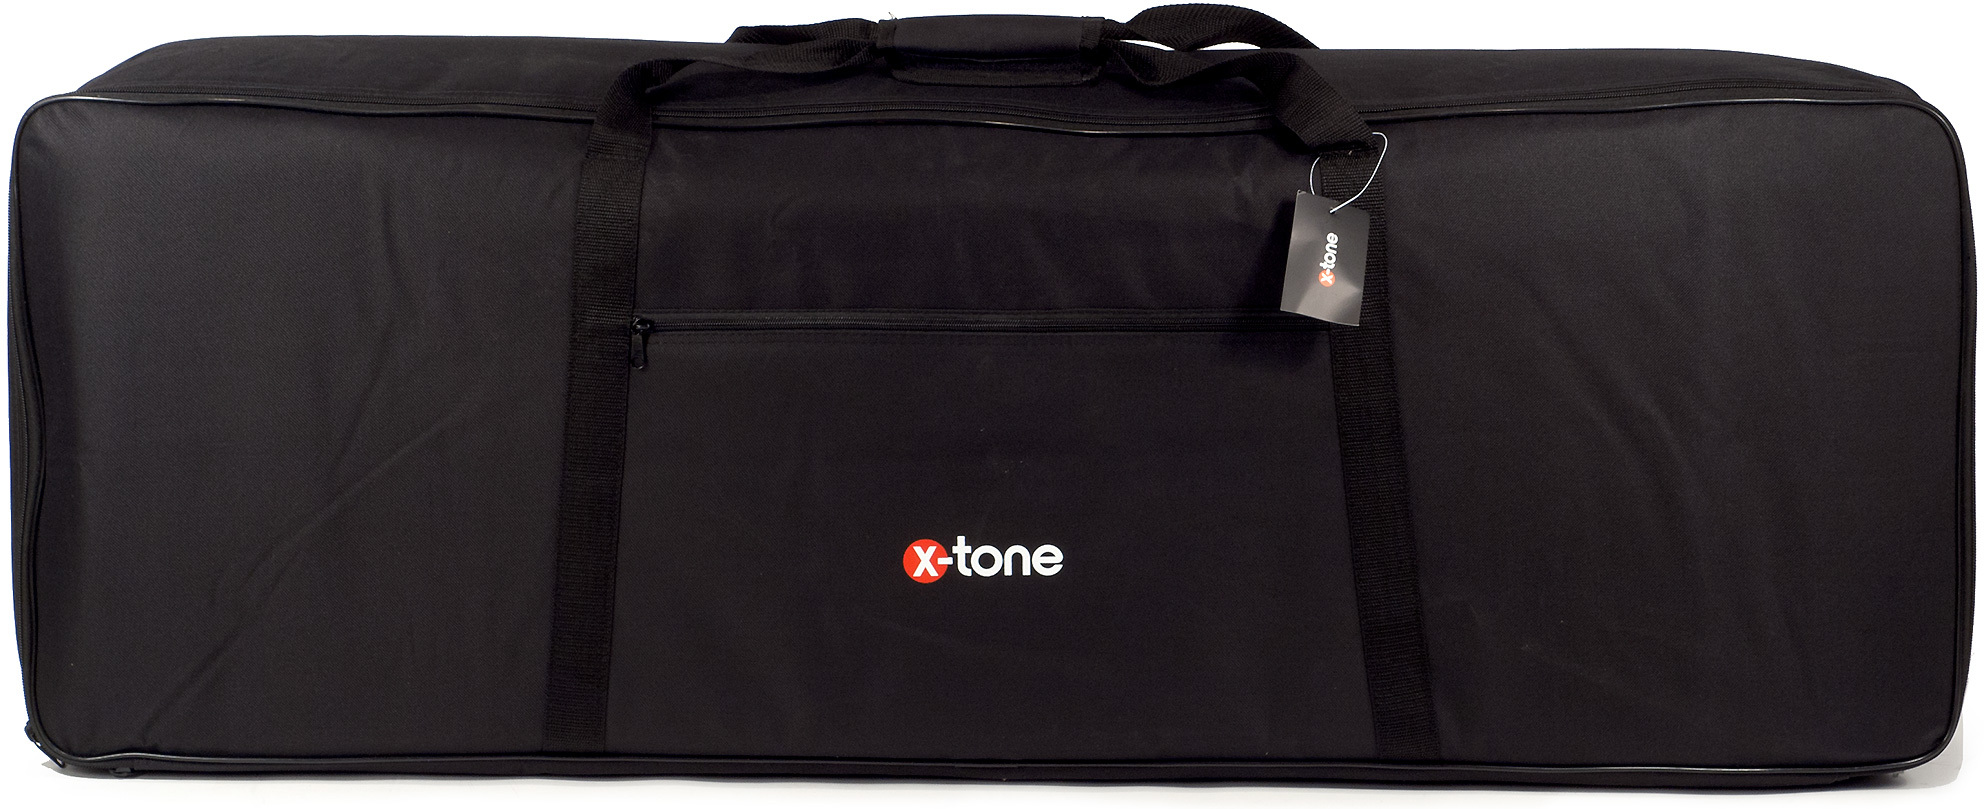 X-tone 2101 Pour Clavier 76 Notes En 10 Mm Black - Gigbag for Keyboard - Main picture